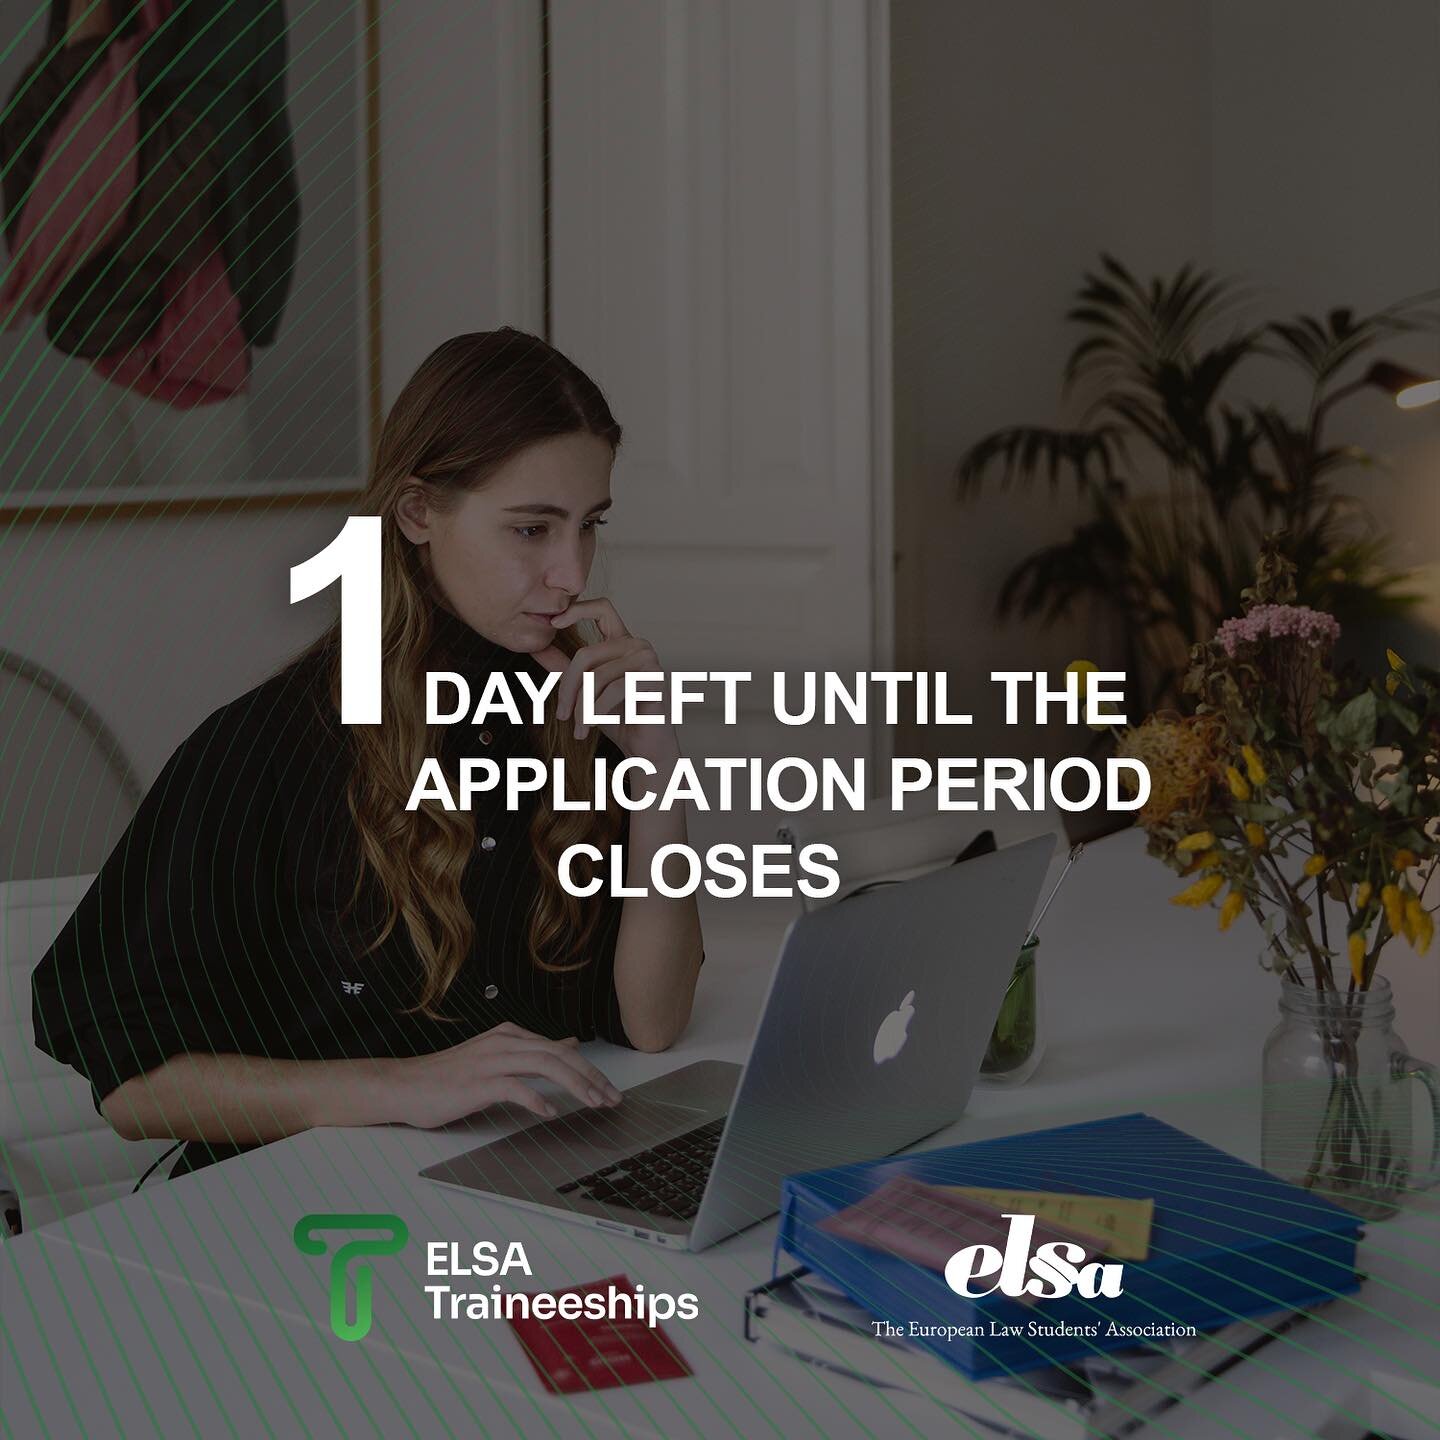 1 day left to apply for ELSA Traineeships! Don't miss the opportunity to work abroad and start your career right.

Find all the available opportunities at traineeships.elsa.org